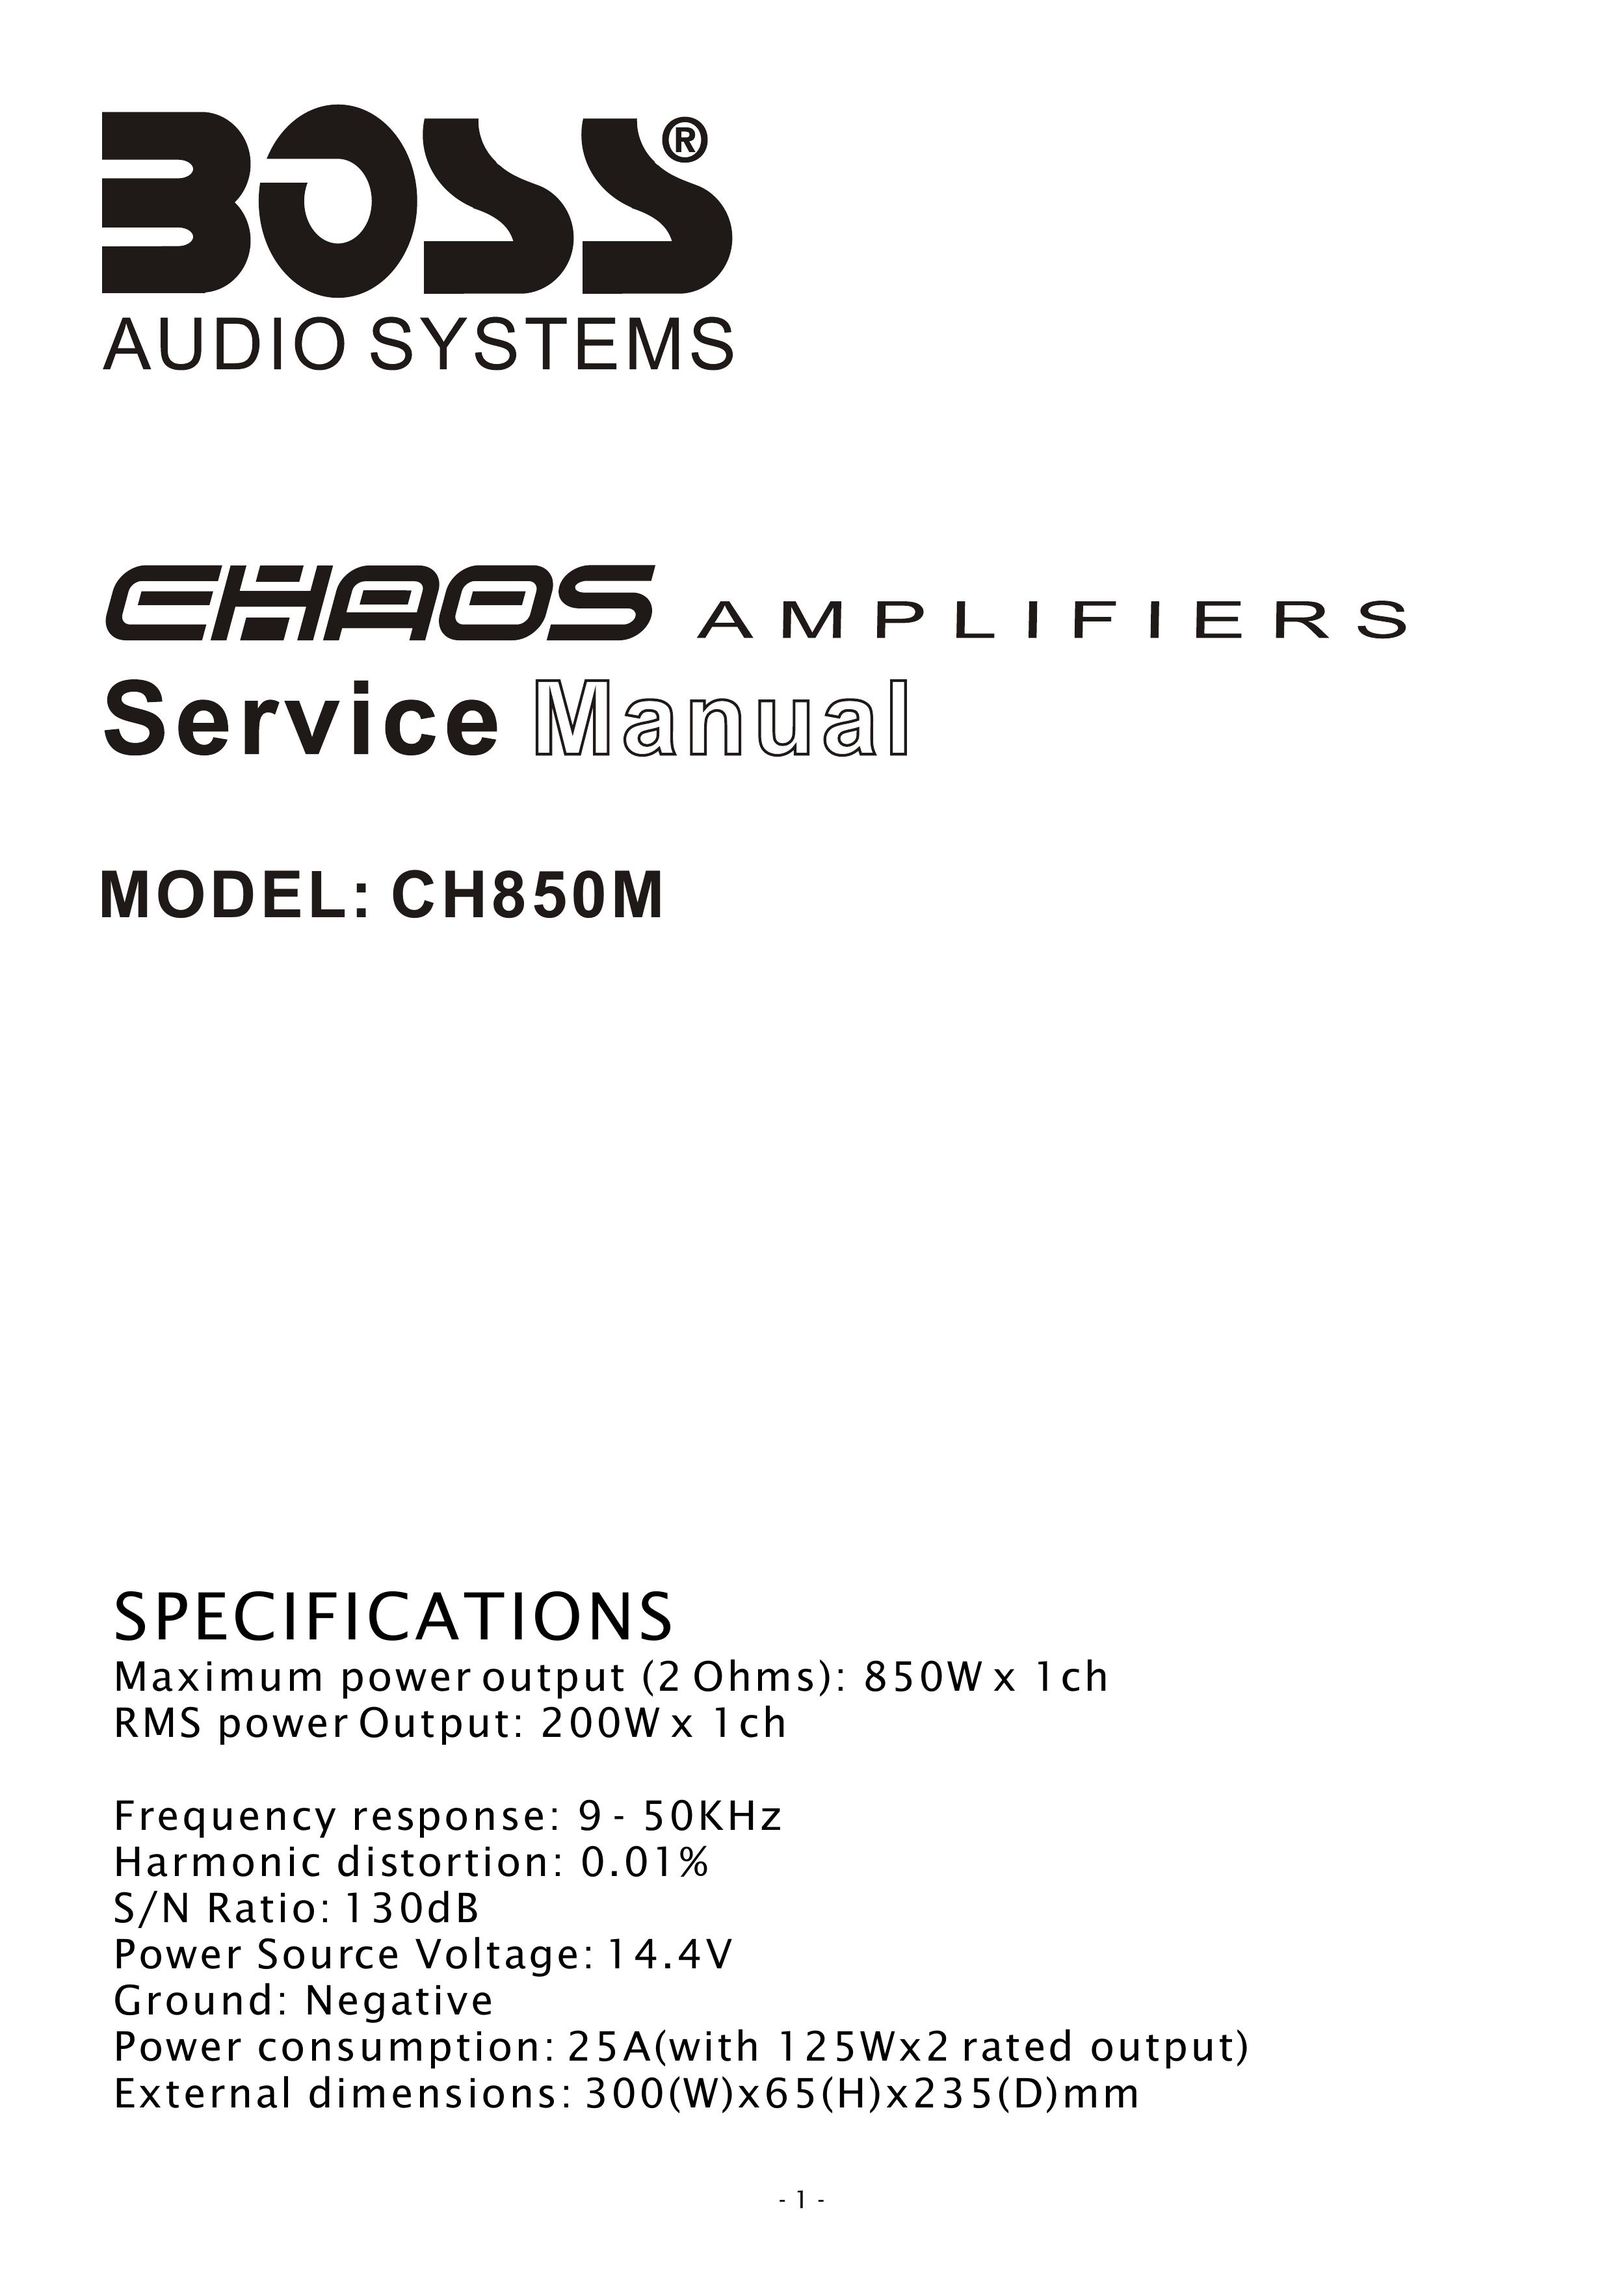 Boss Audio Systems CH850M Stereo Amplifier User Manual